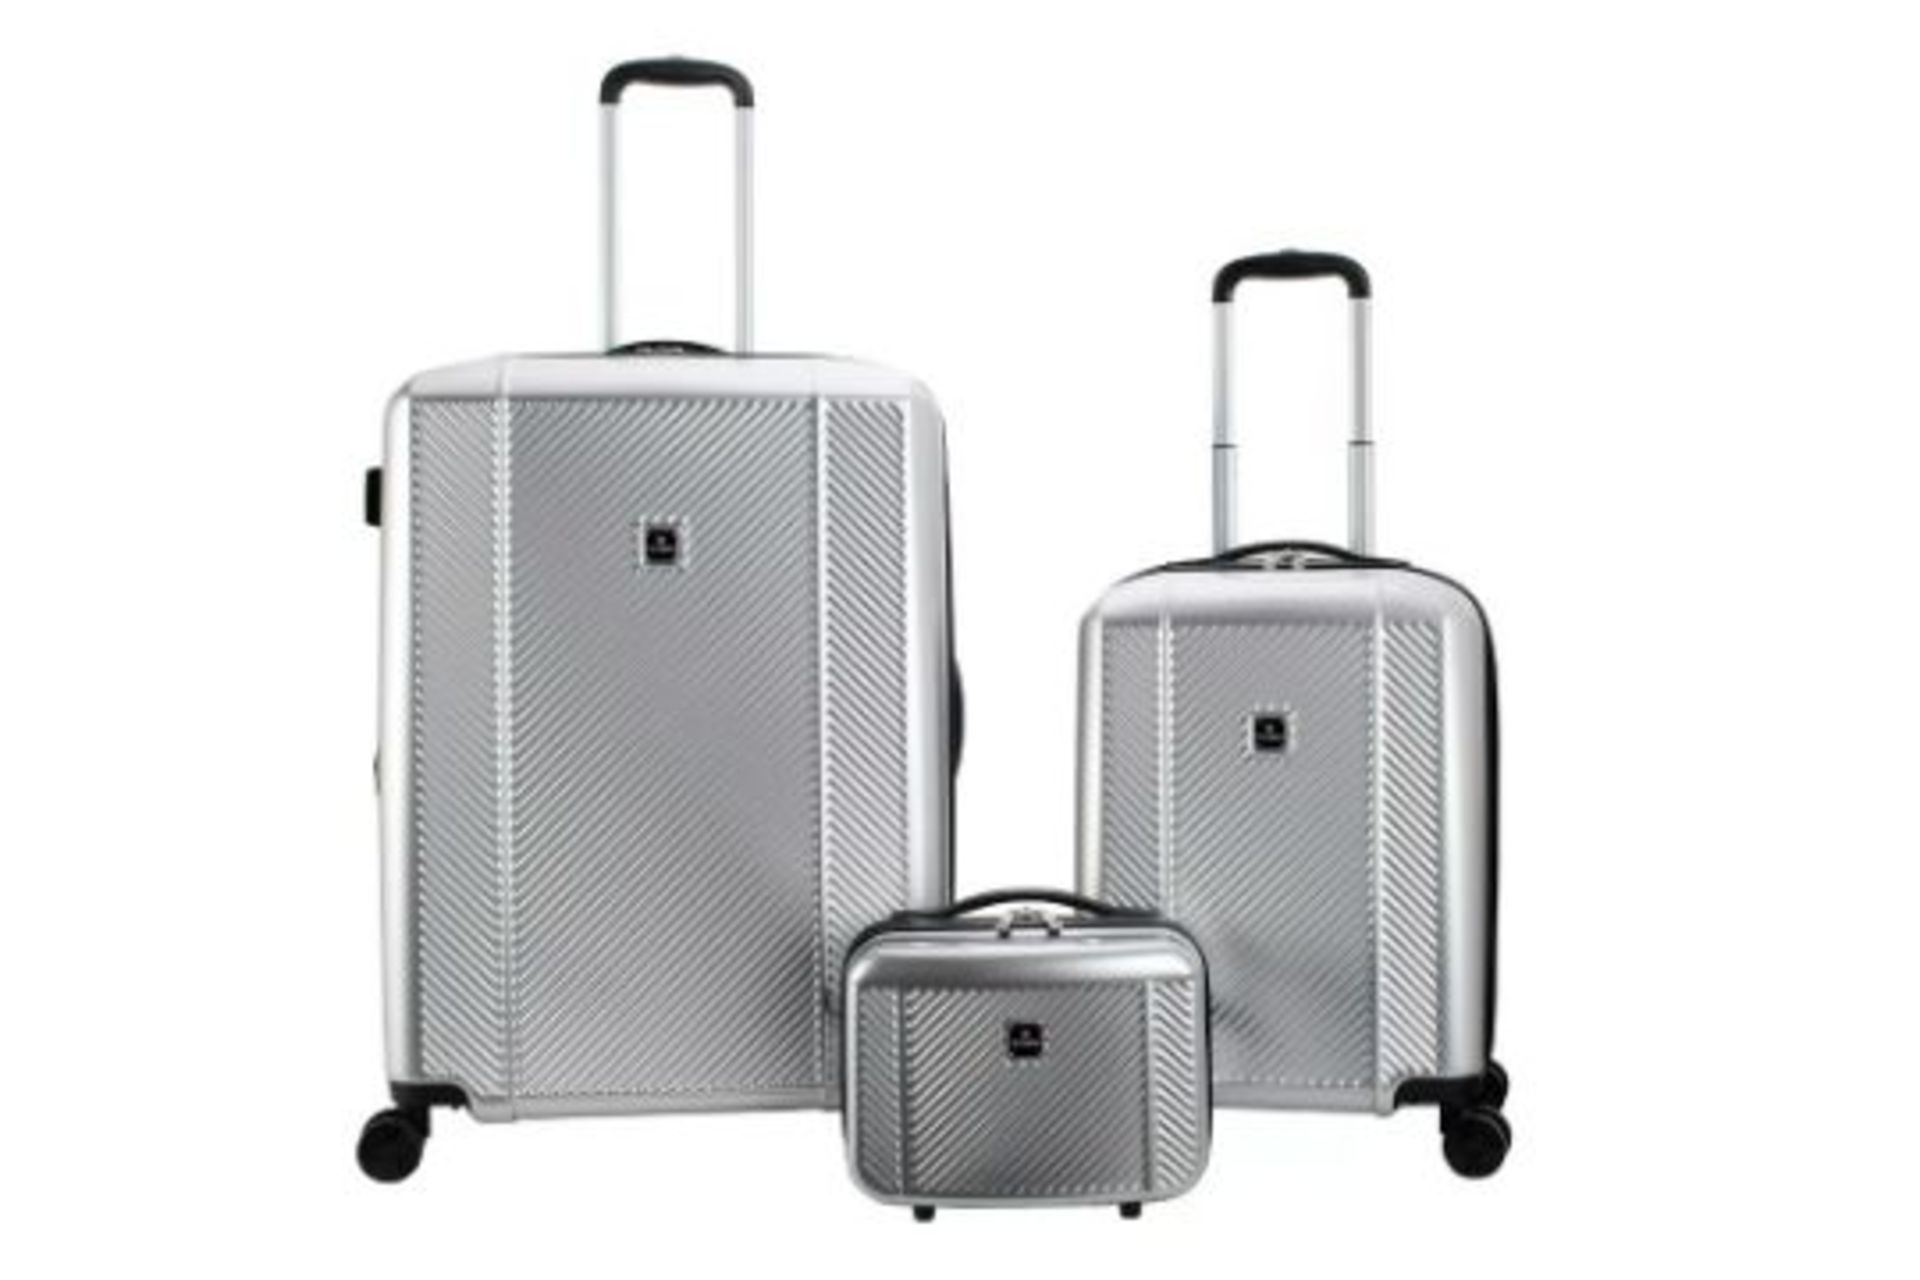 New Boxed 3 Piece Sets of TAG Spectrum Hardside Luggage Set. (SILVER). RRP £199.99 per set. Get - Image 3 of 3